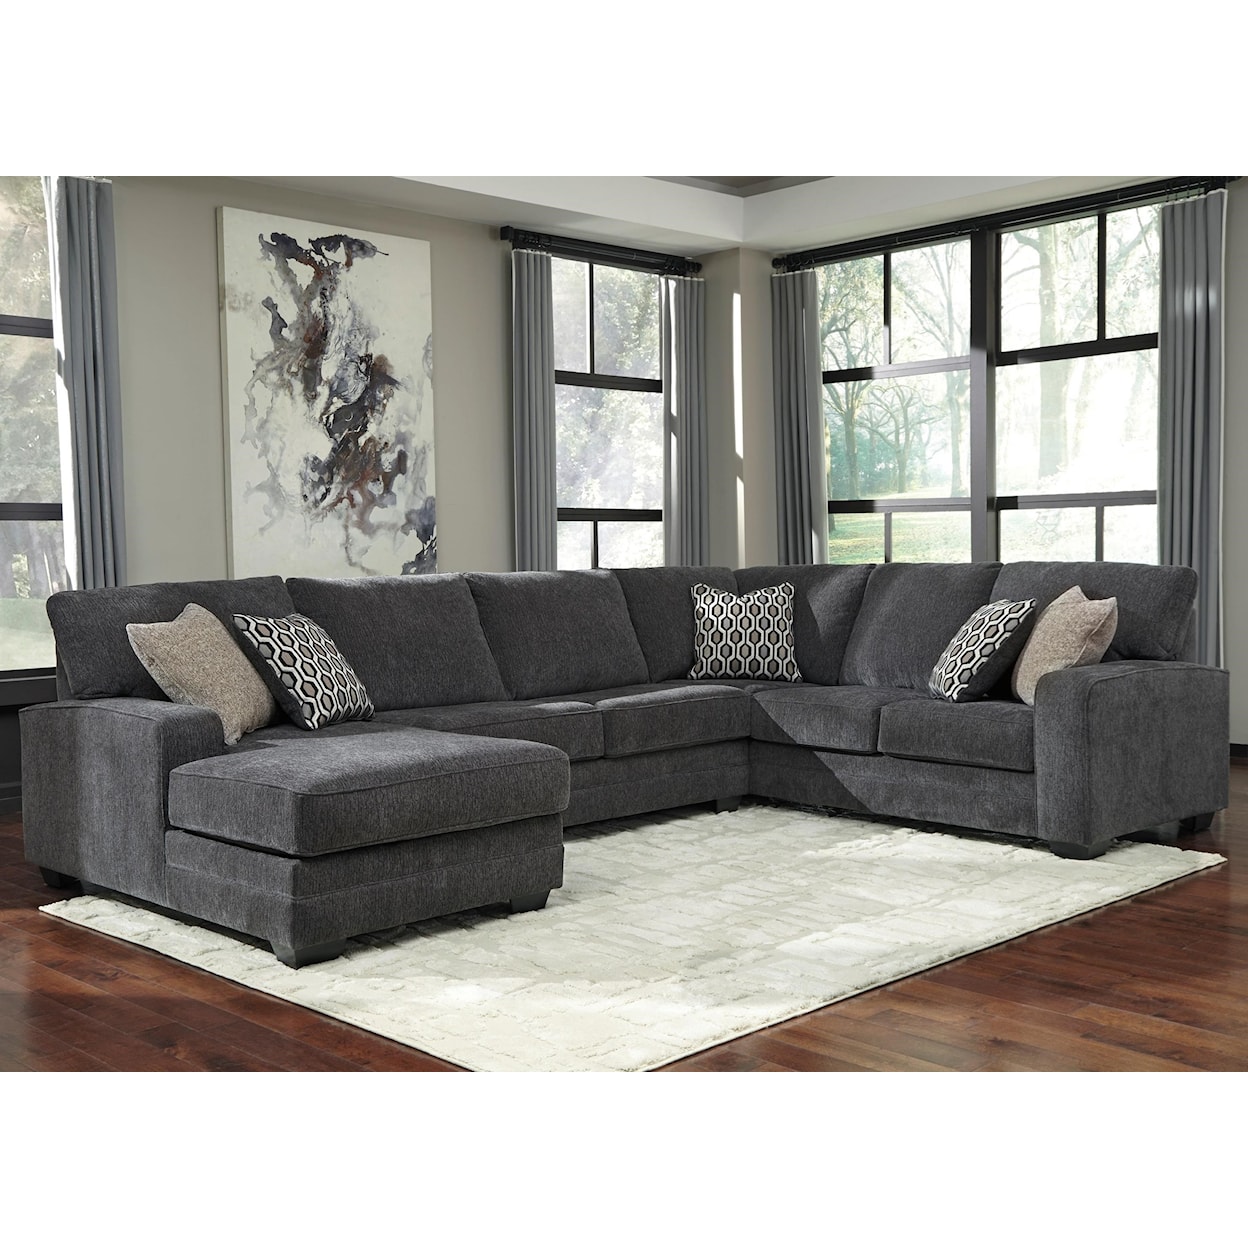 Benchcraft Tracling Sectional with Left Chaise